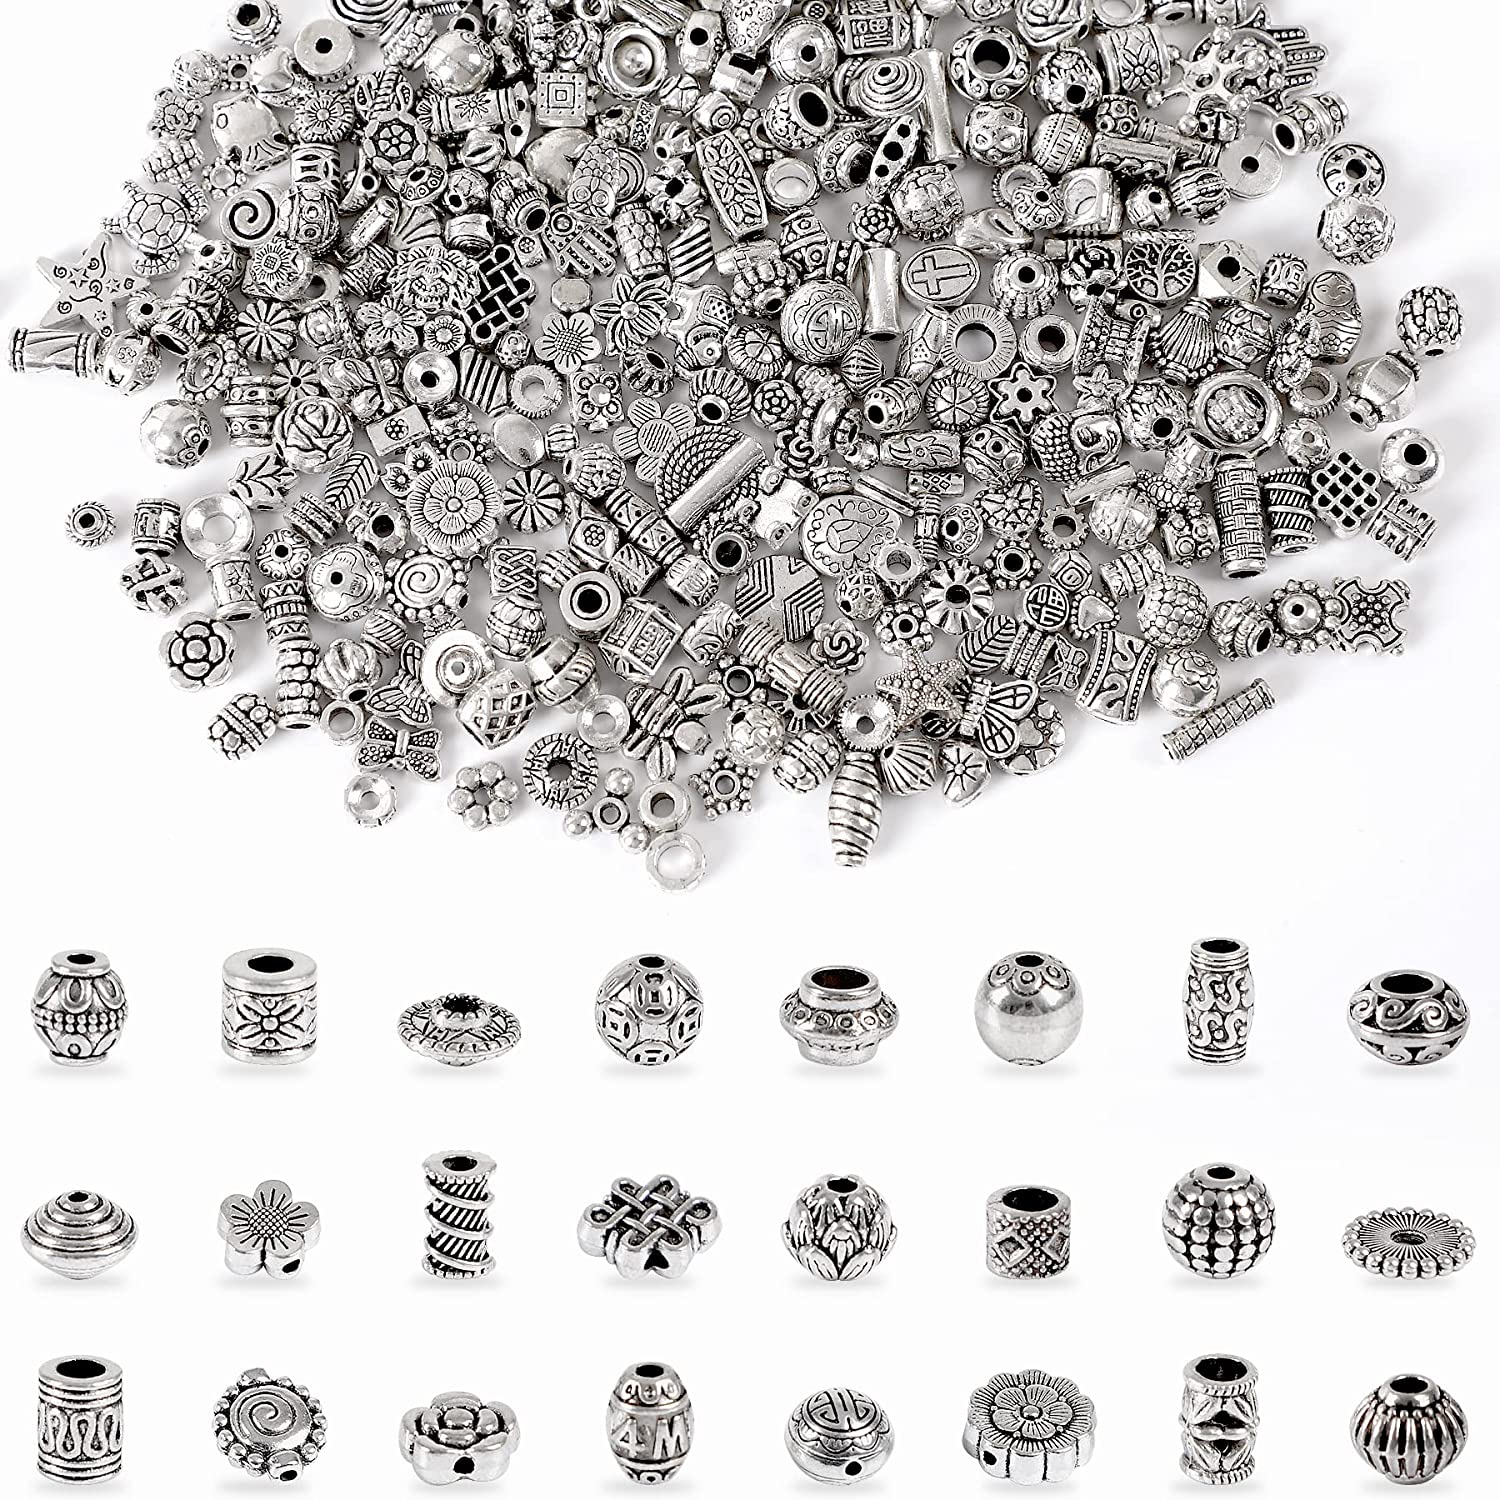 UPINS 300Pcs Silver Spacer Beads for Jewelry Bracelet Necklace